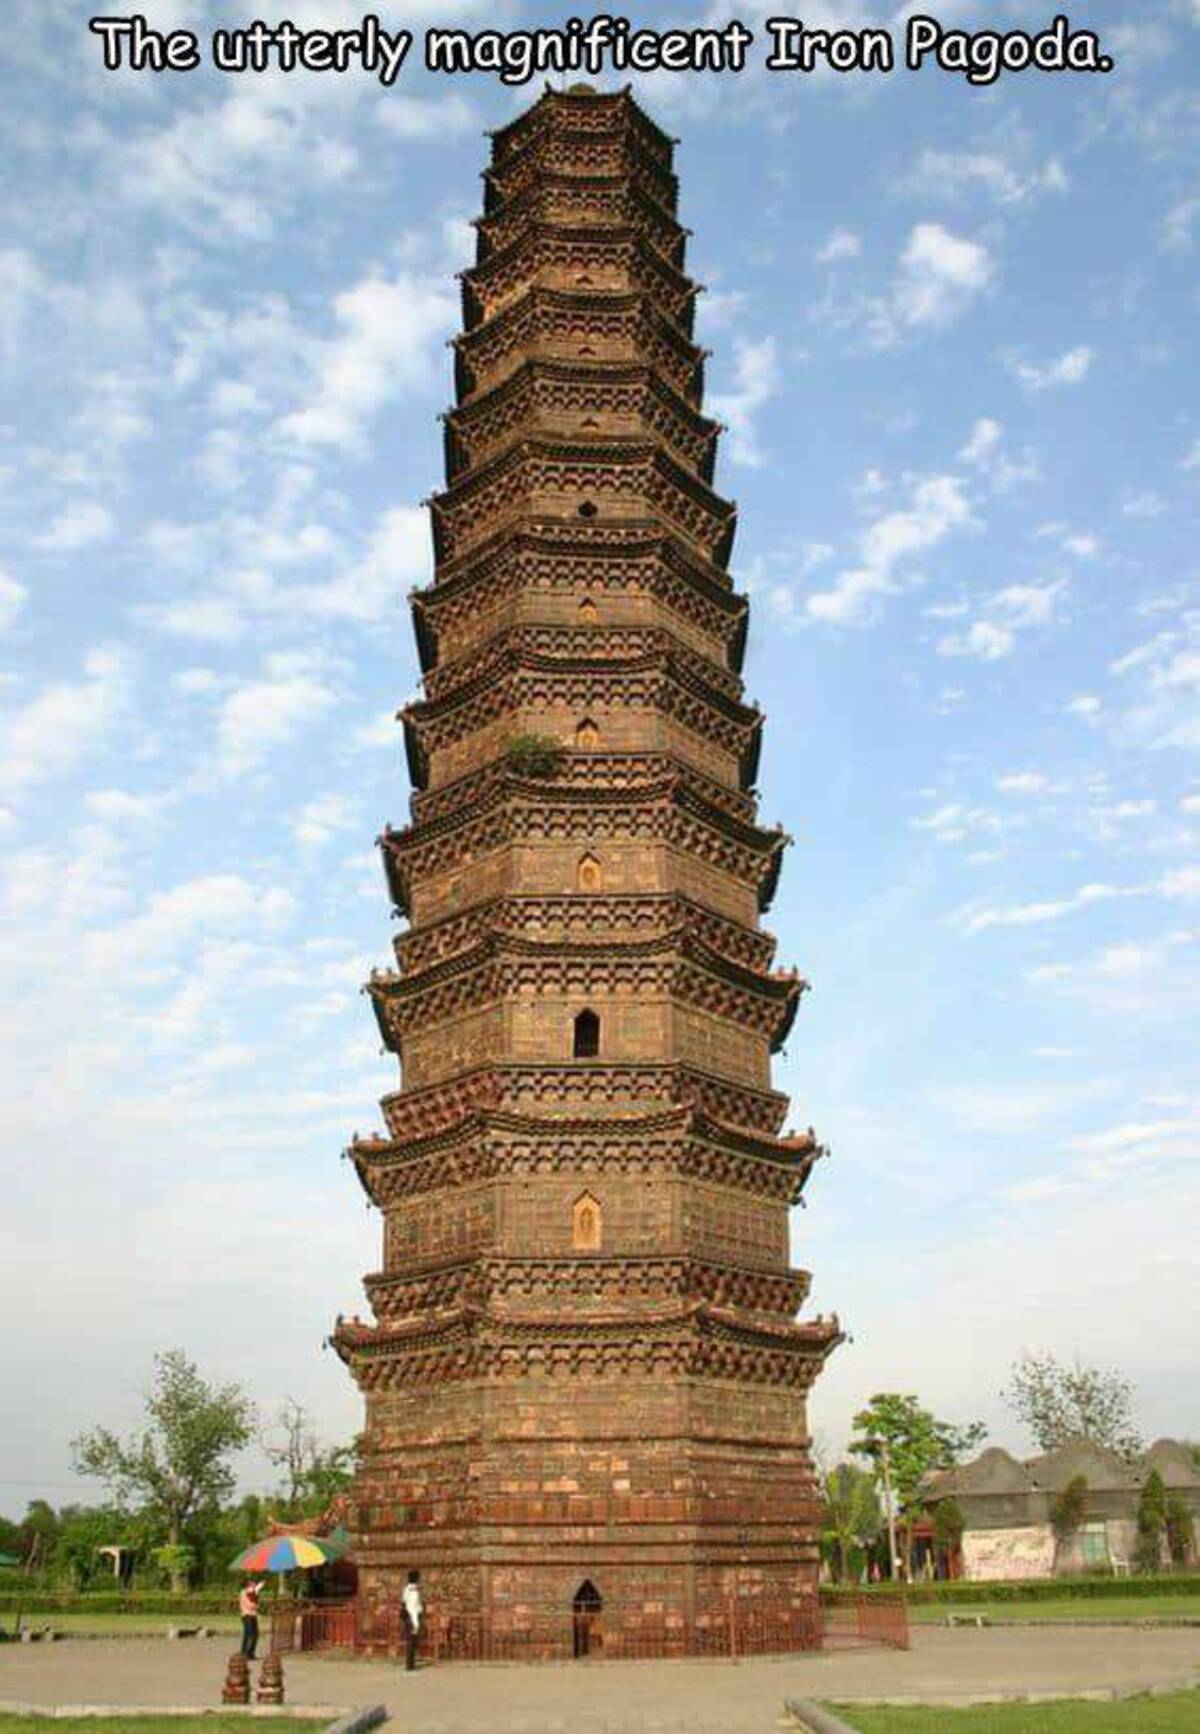 pagoda song dynasty - The utterly magnificent Iron Pagoda.